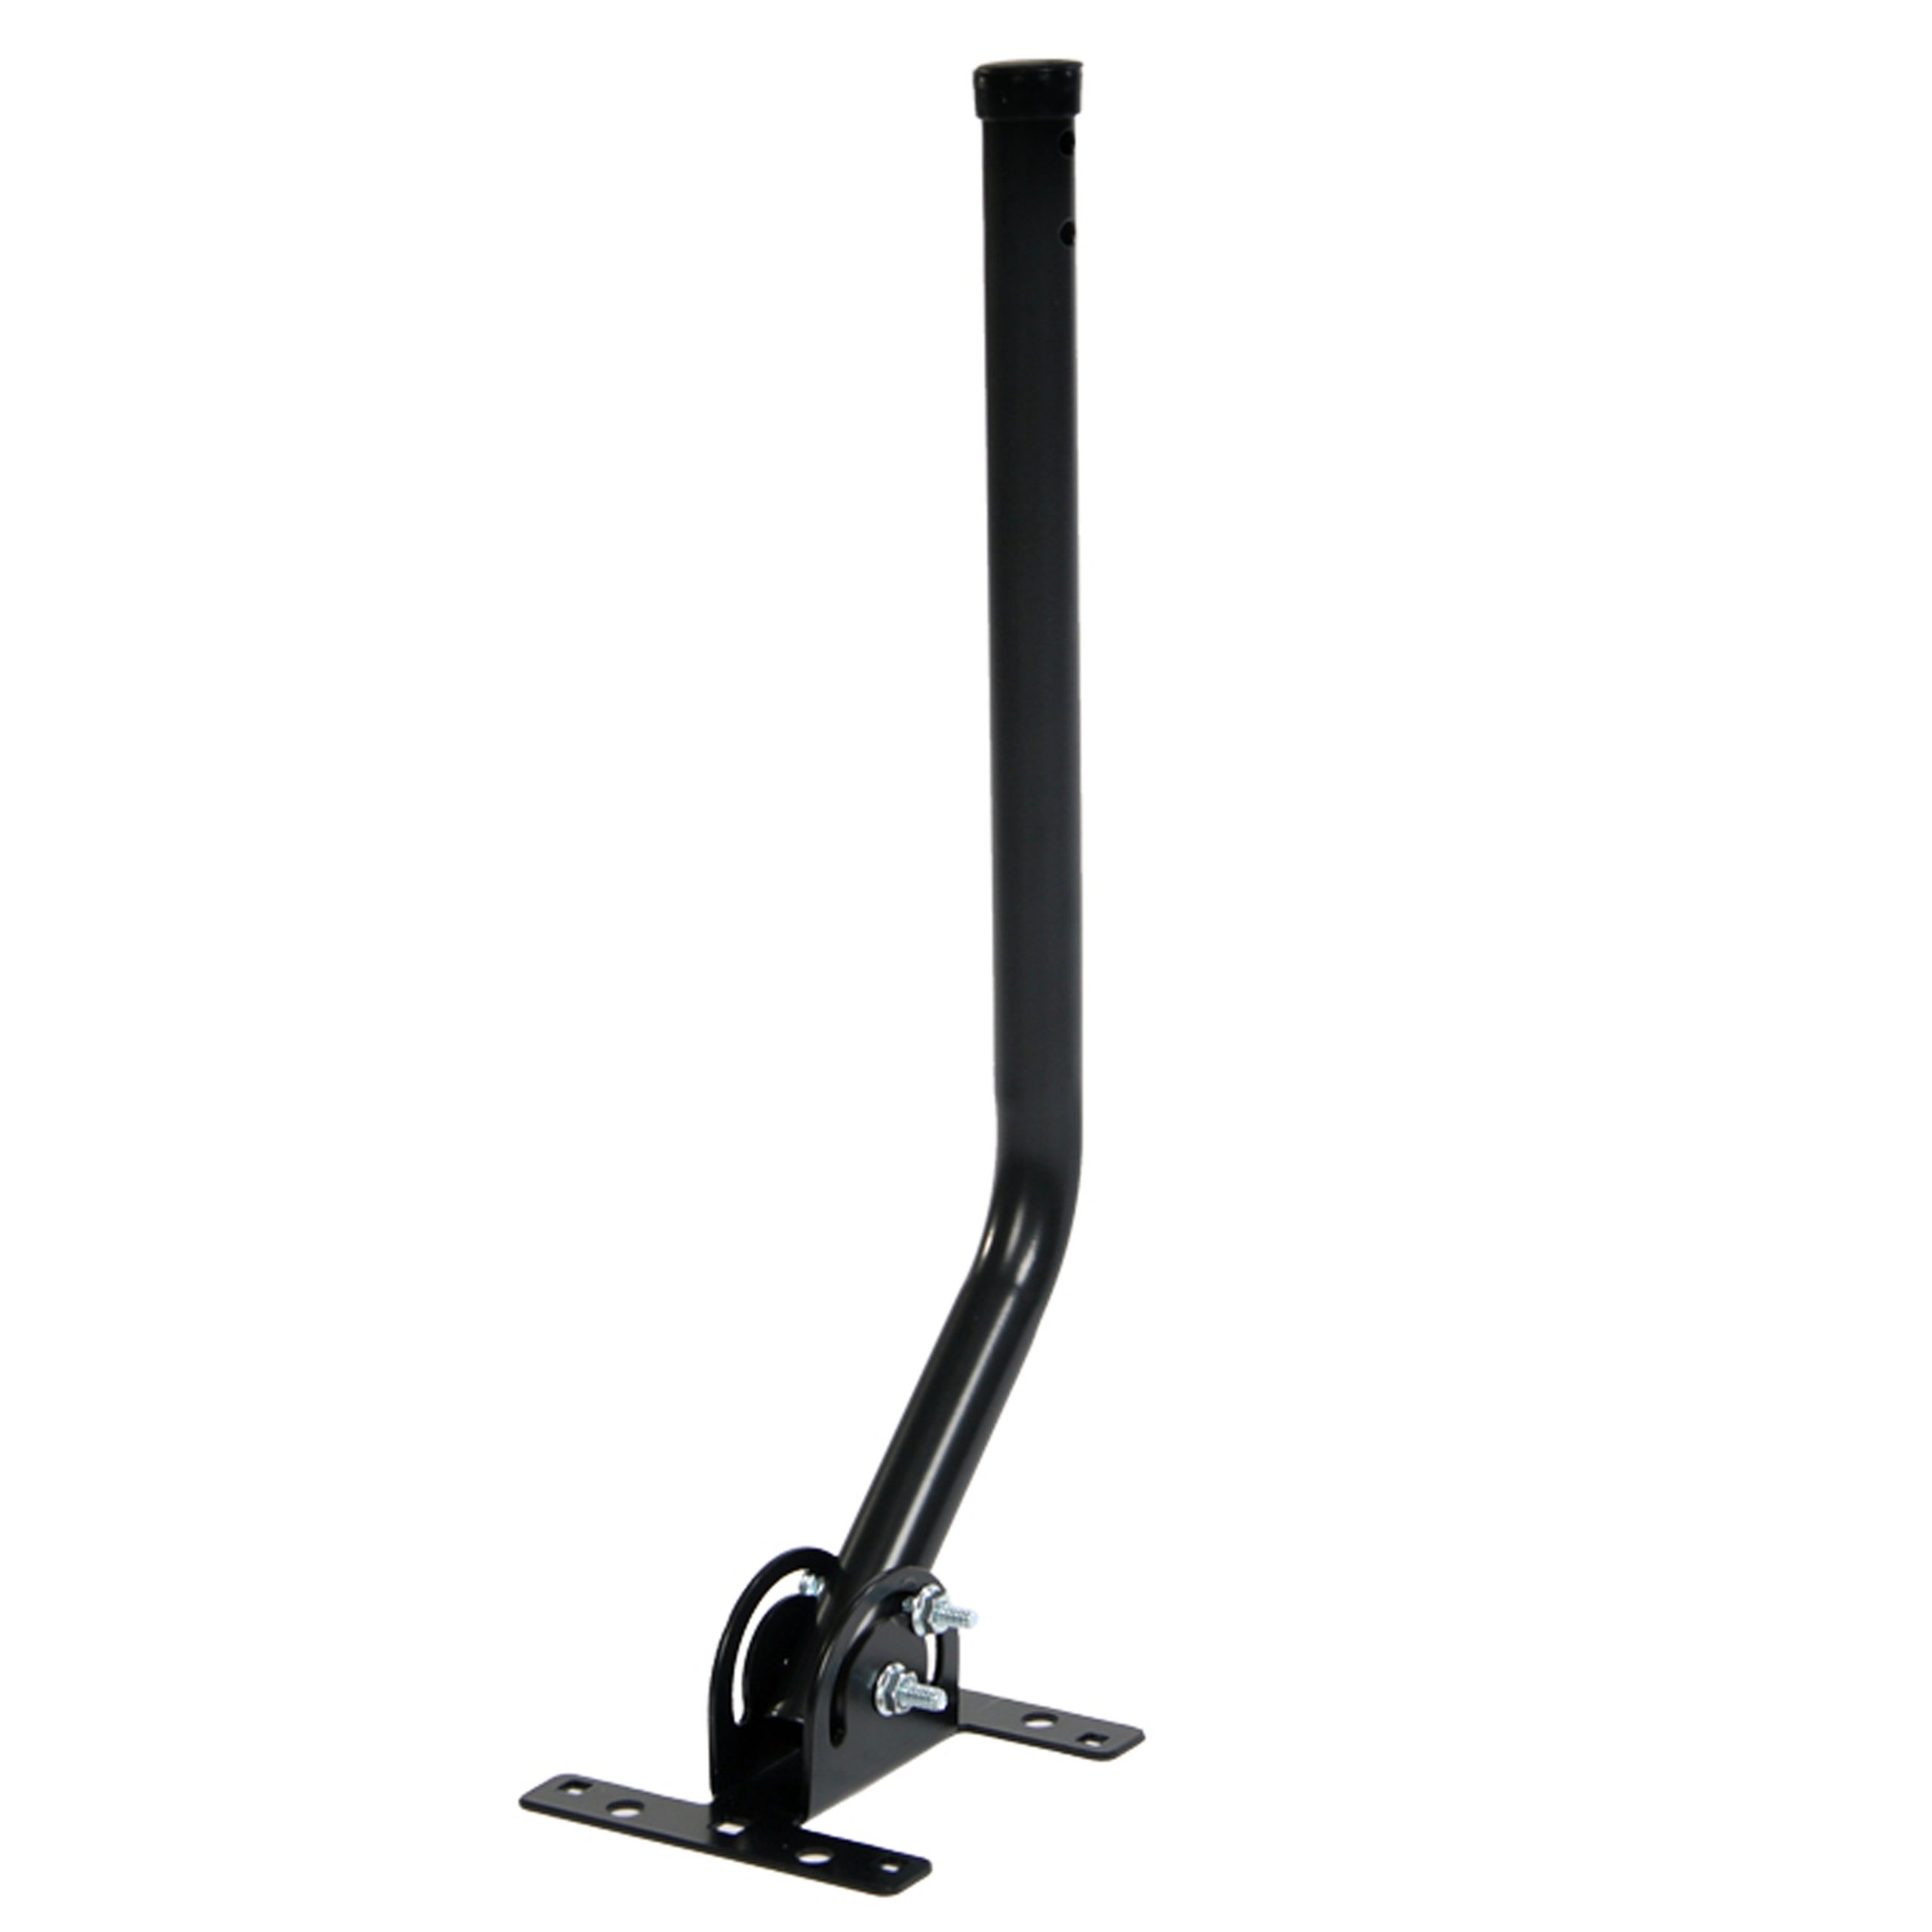 Antennas Direct ClearStream 20-inch TV Antenna Mast, 1-inch OD, All-weather Mounting Hardware, Adjustable Mast Clamp, Installati